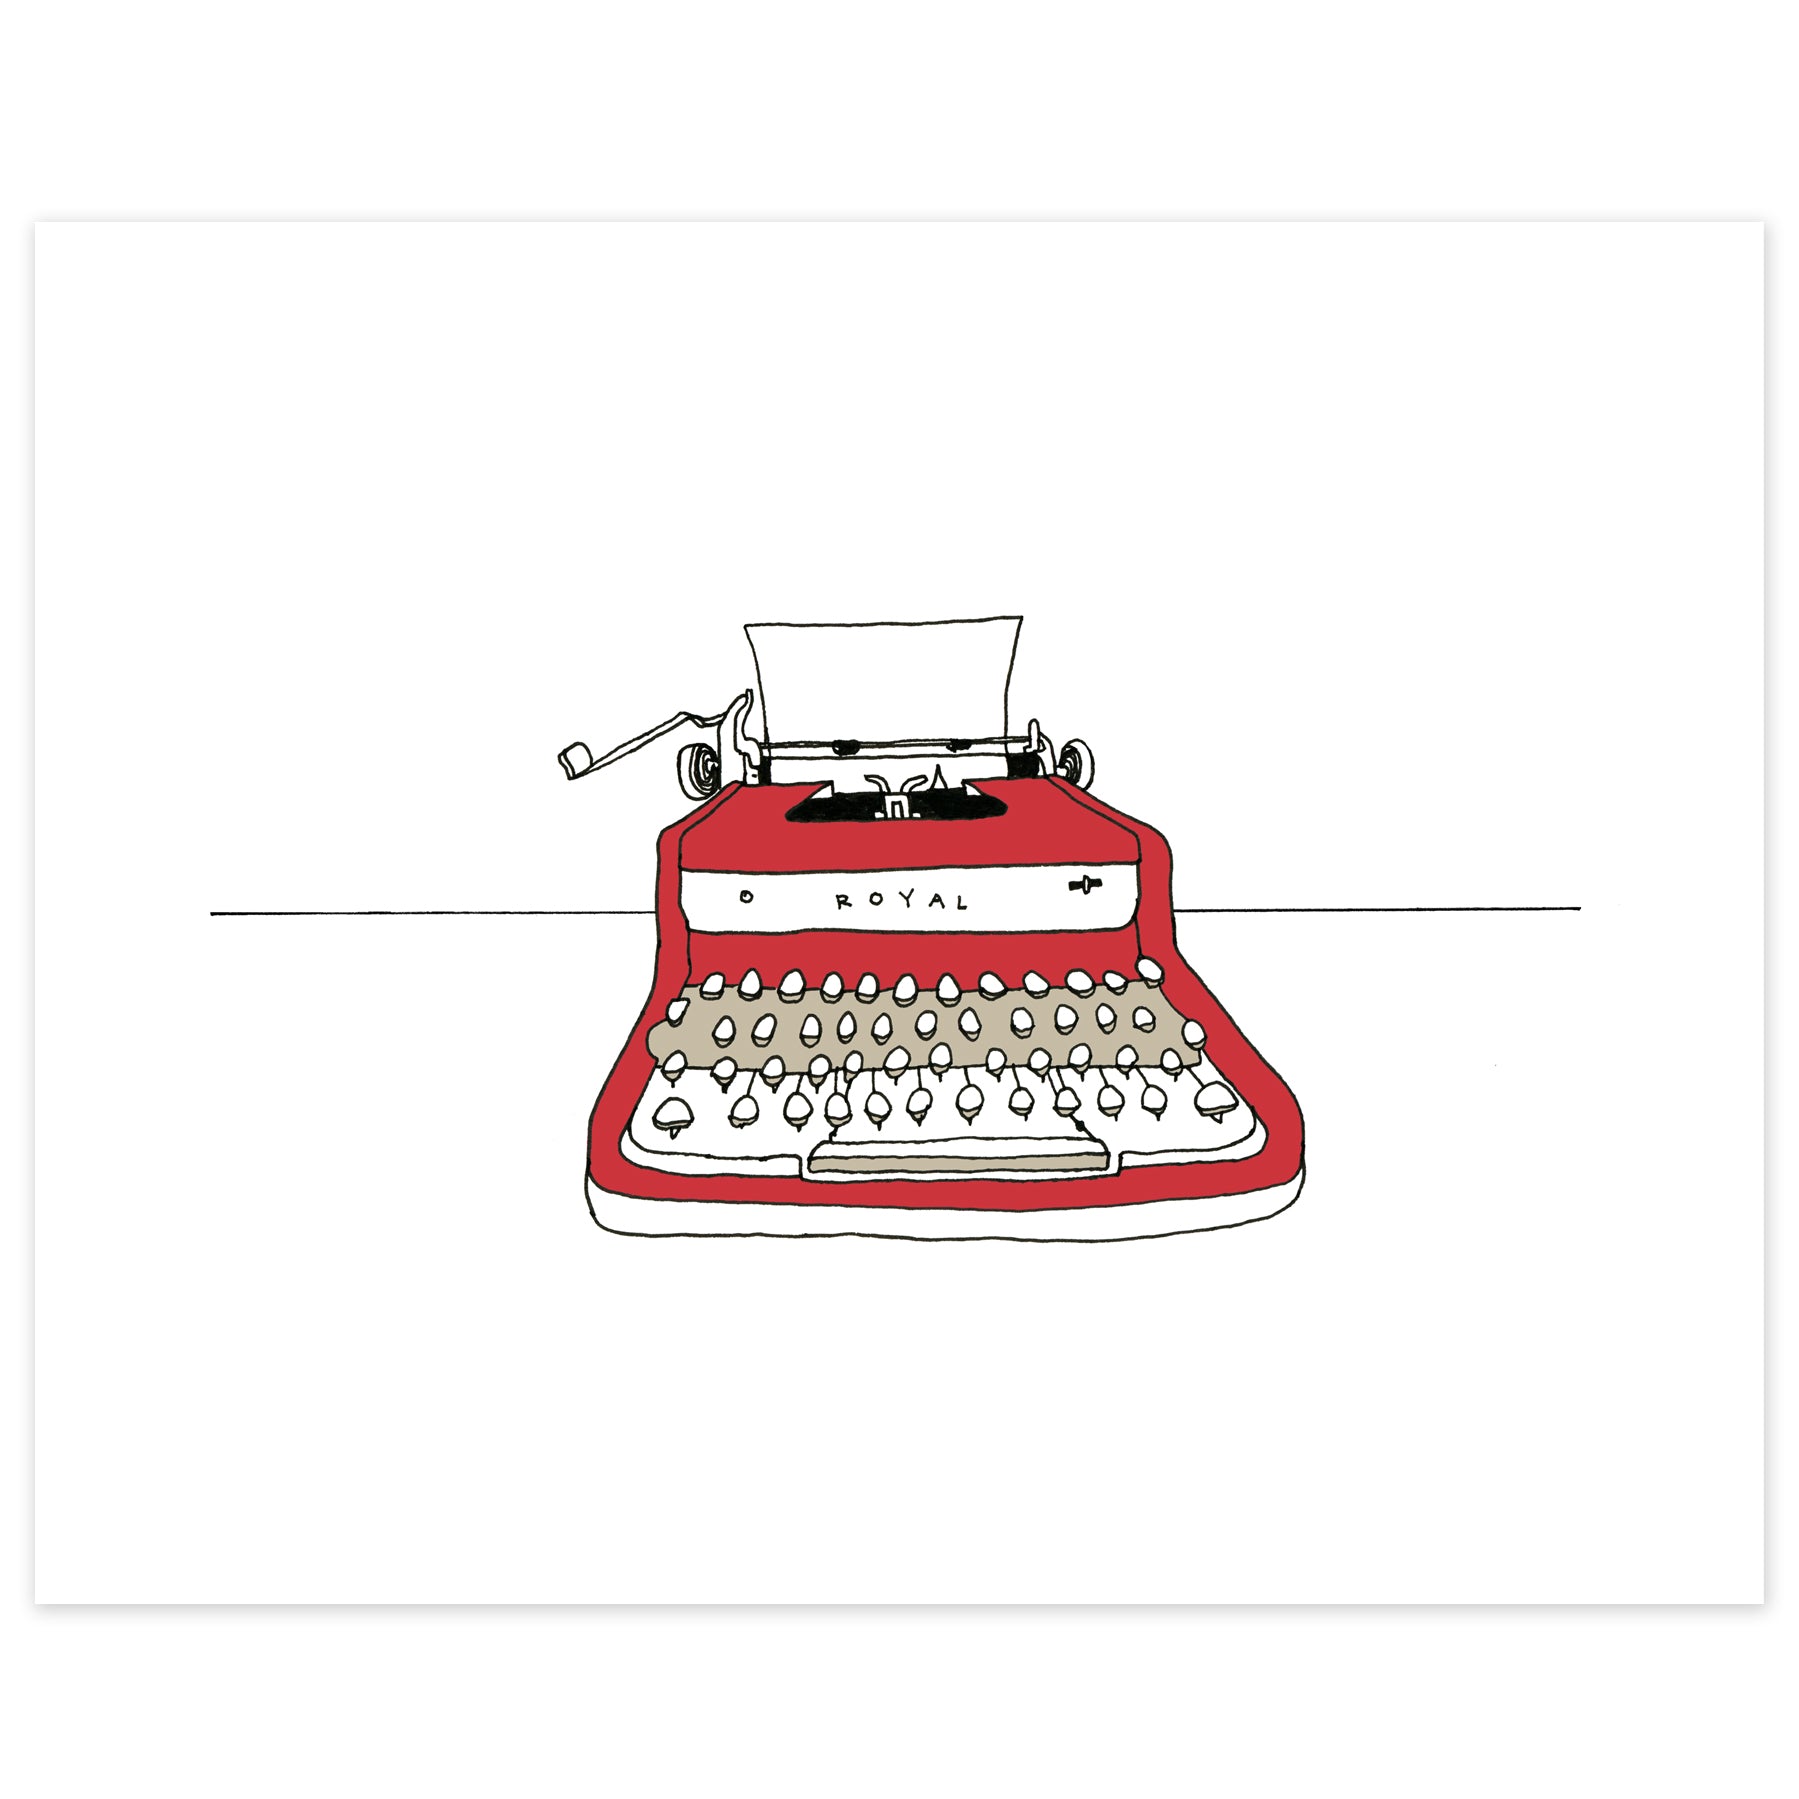 A print of a hand-drawn ink illustration of red Royal vintage typewriter with a piece of blank paper loaded in it. Shown on a white background. 